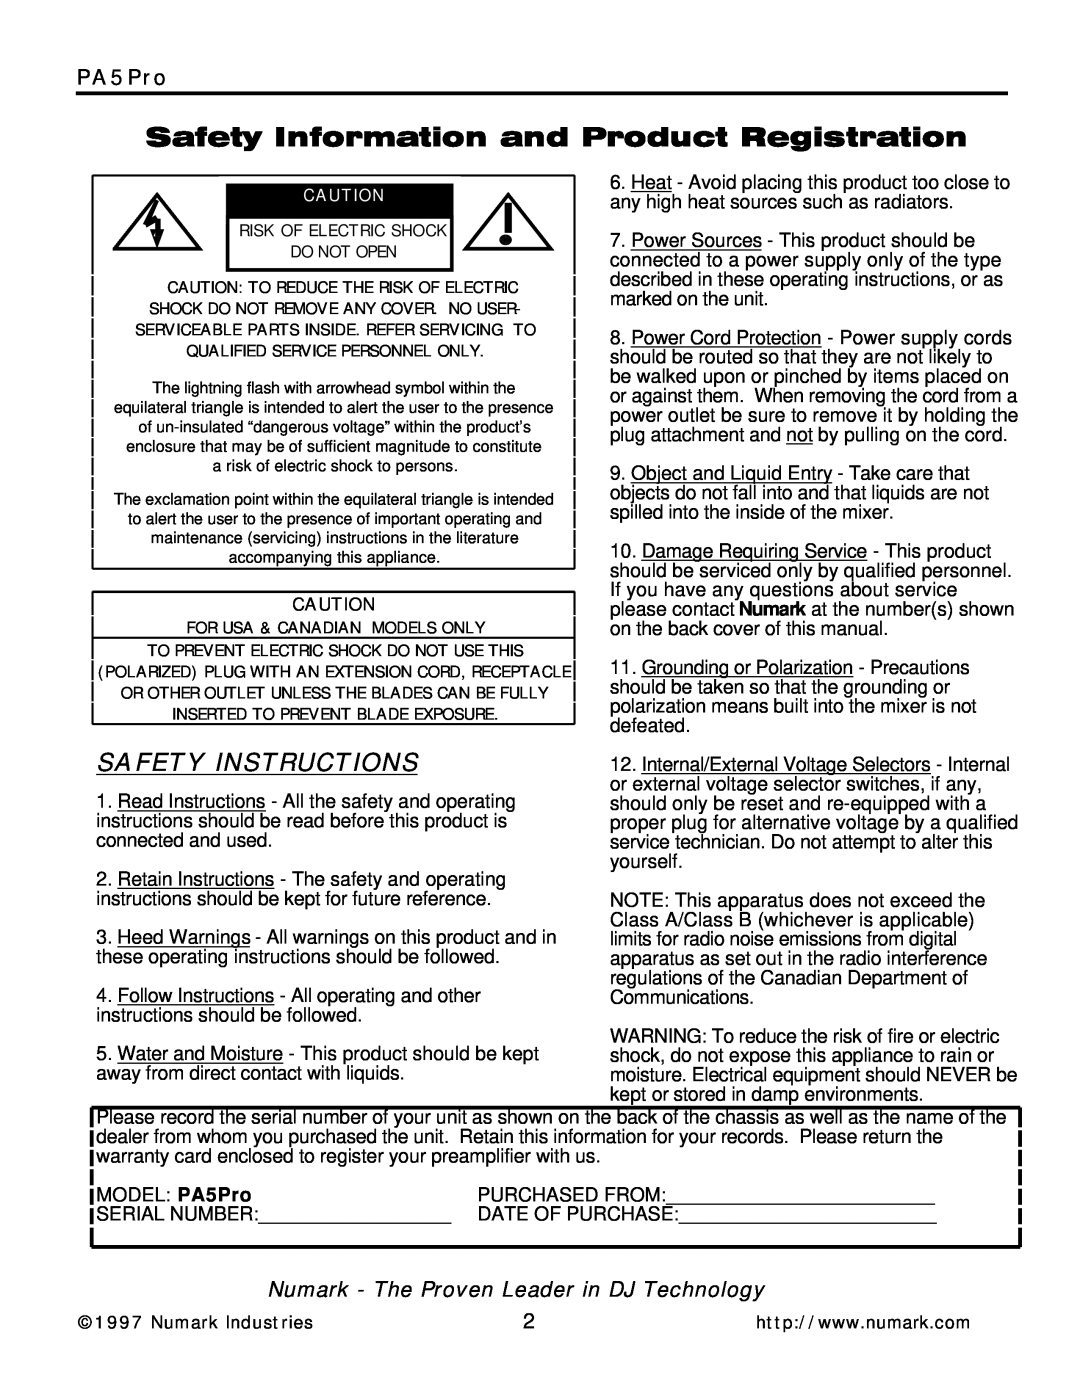 Numark Industries PA5Pro owner manual Safety Instructions, Numark - The Proven Leader in DJ Technology 